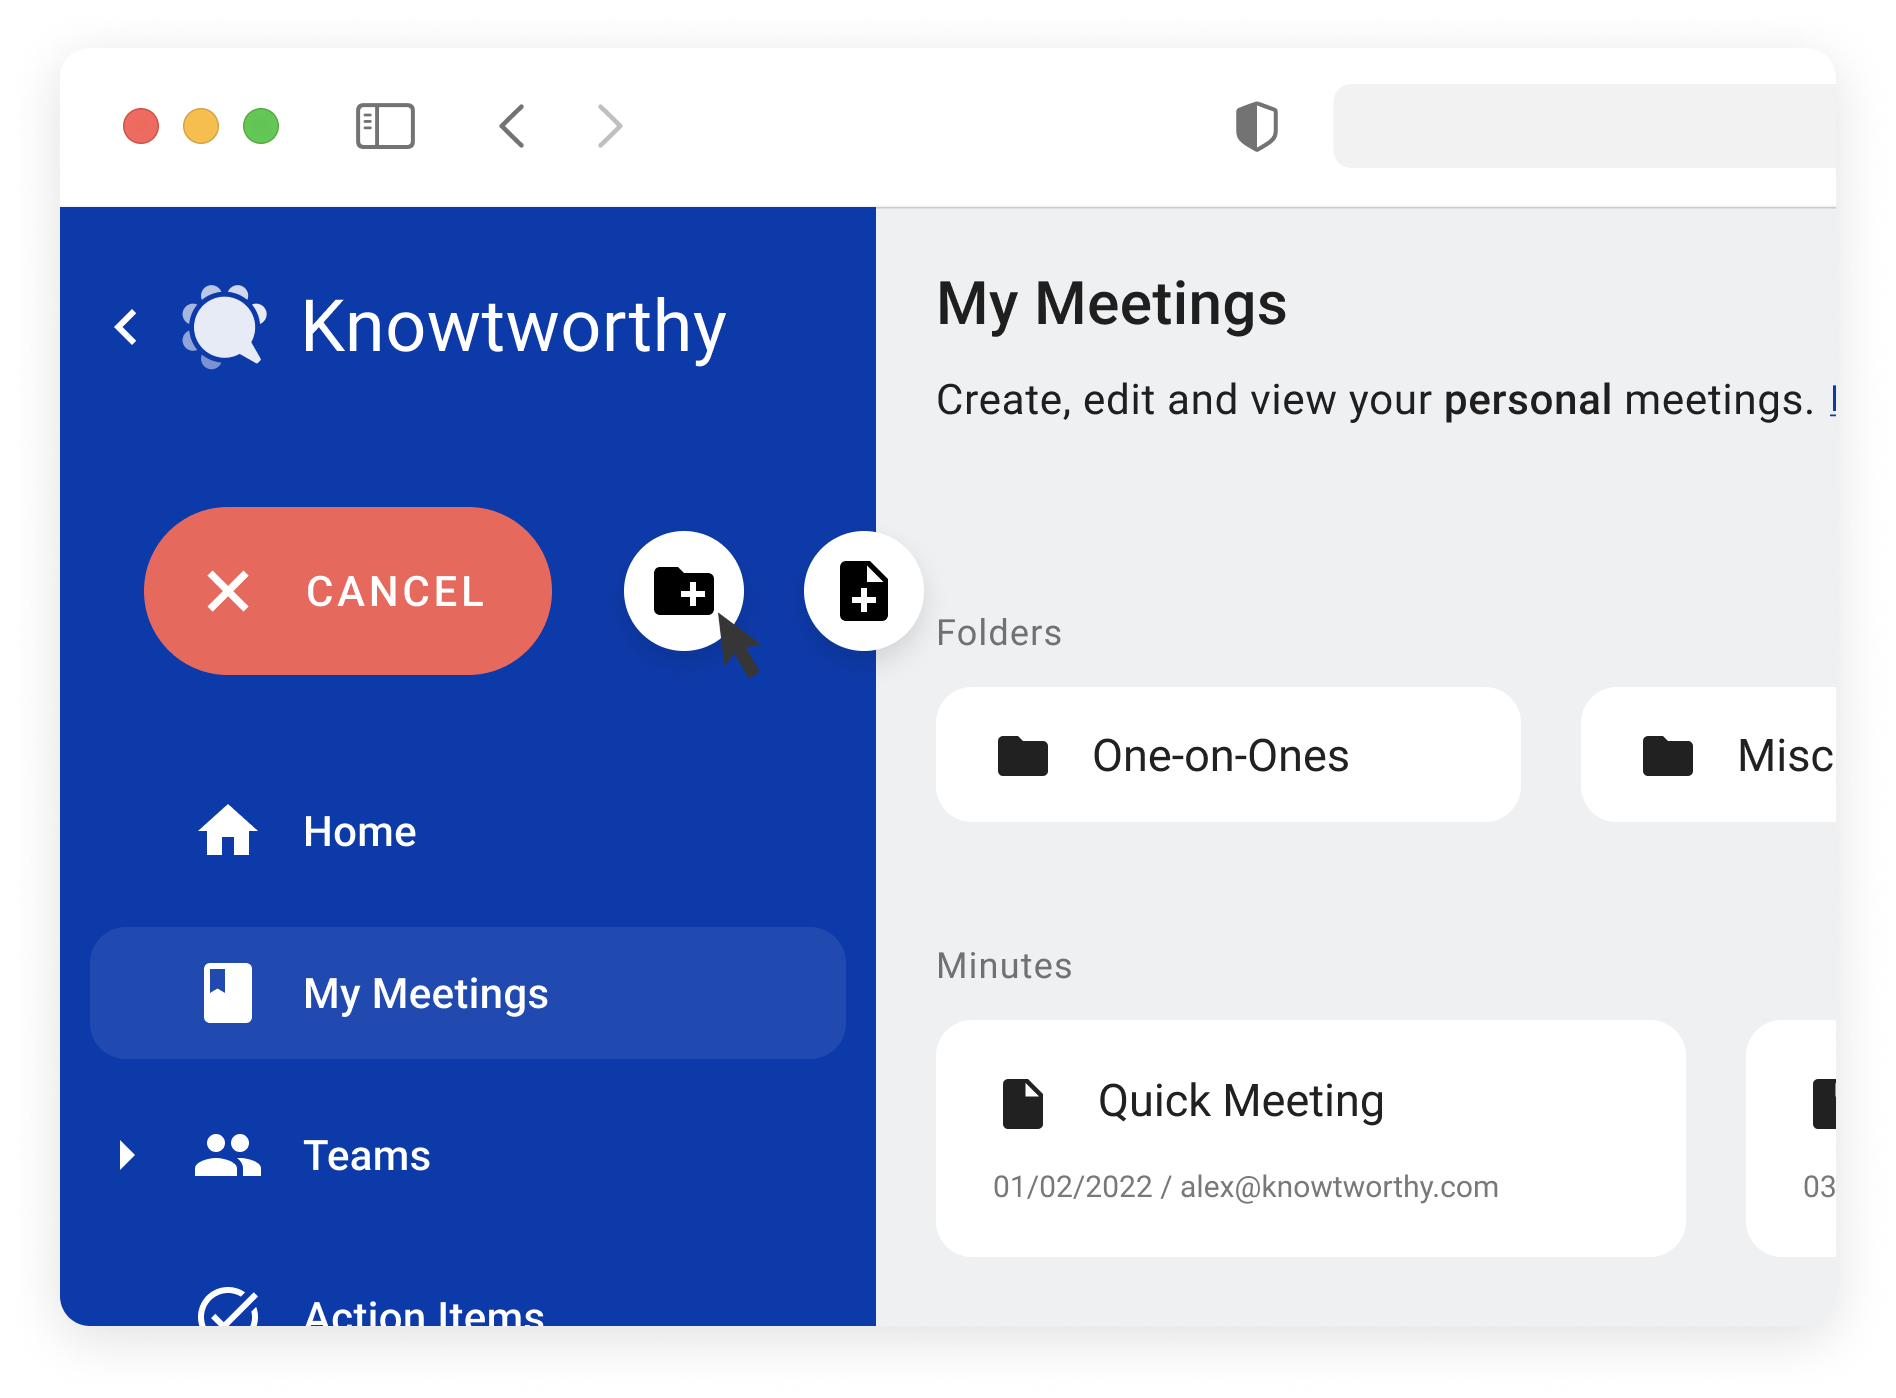 How to use the “My Meetings” Page